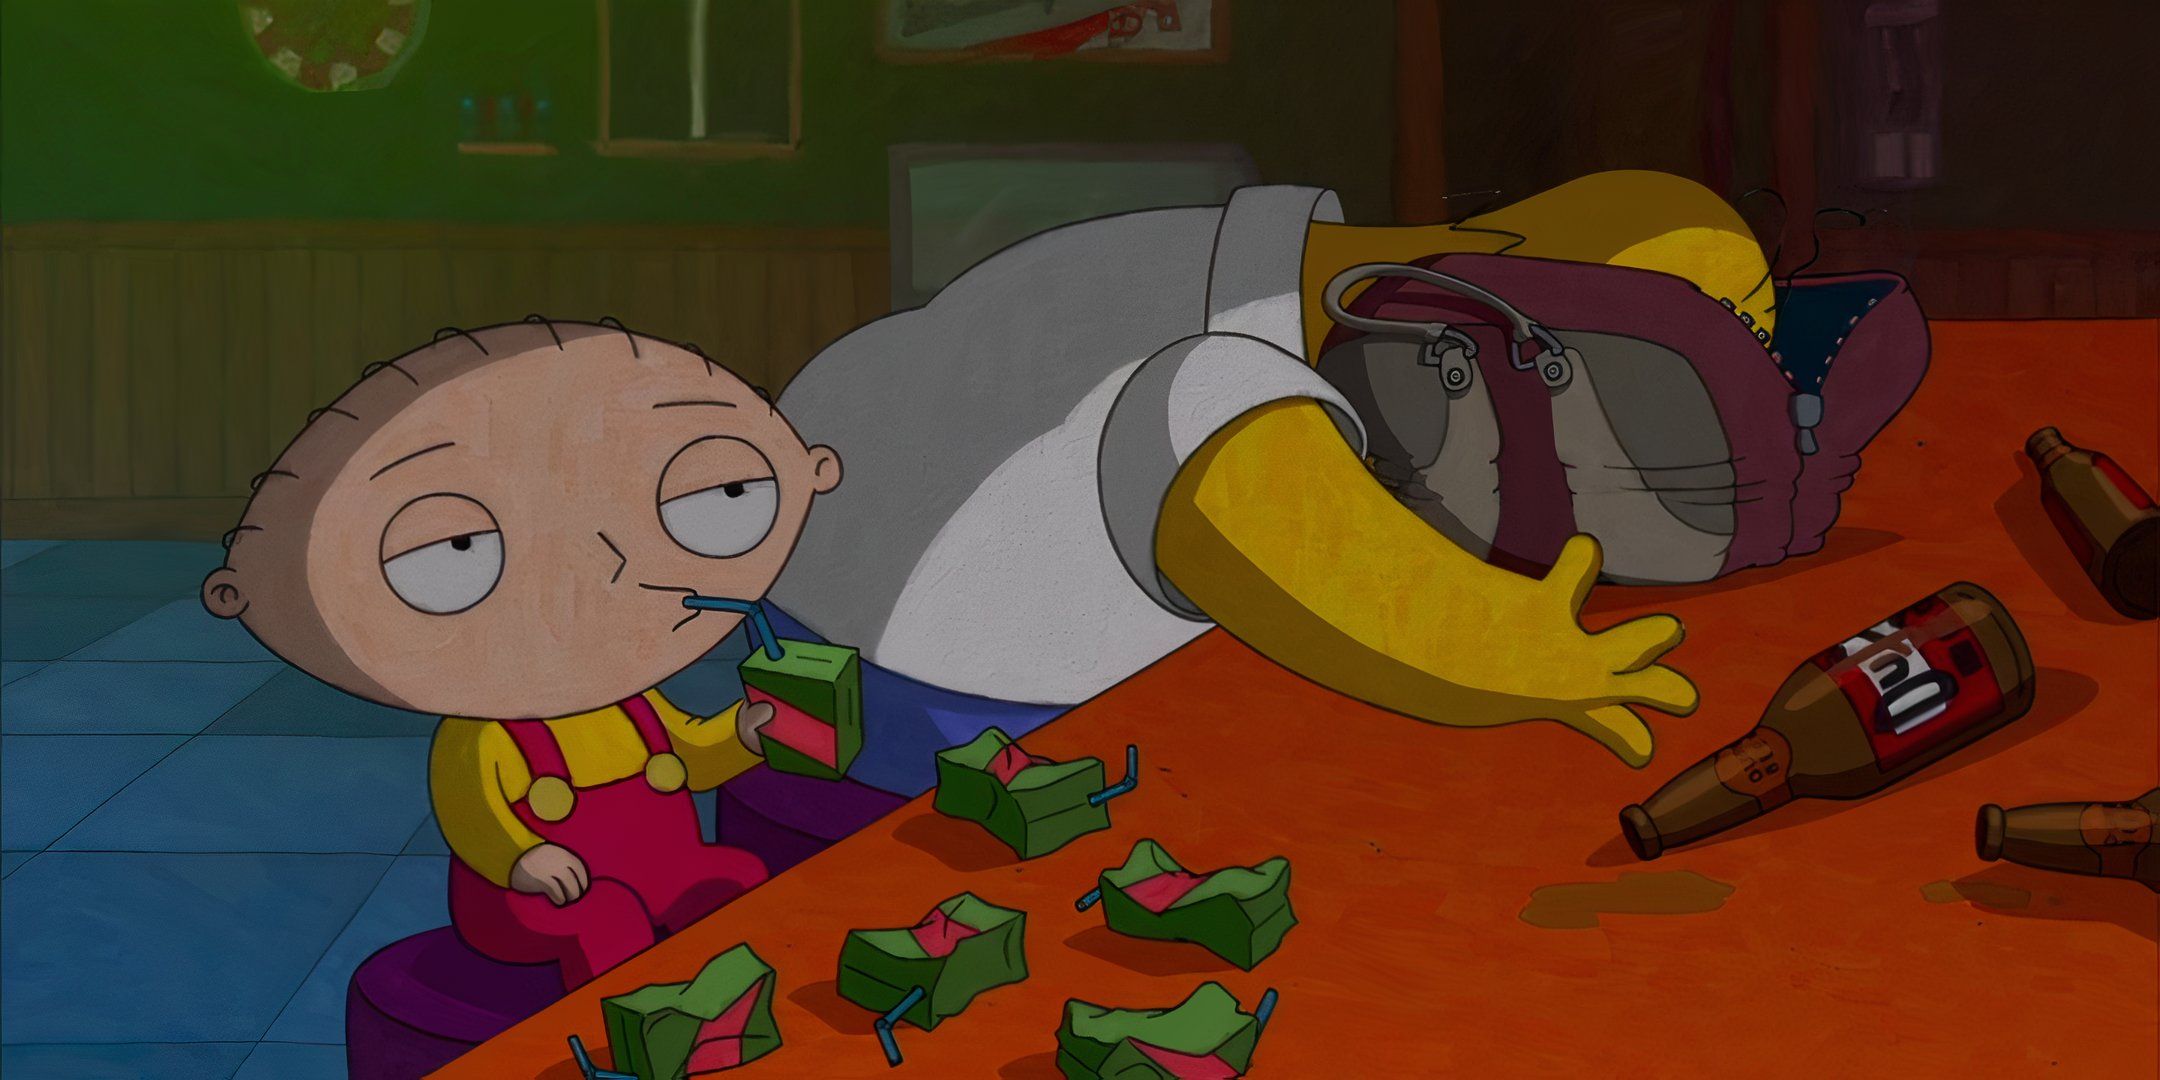 Homer drunk and asleep next to Stewie drinking a juice box at the bar in May the 12th Be with You